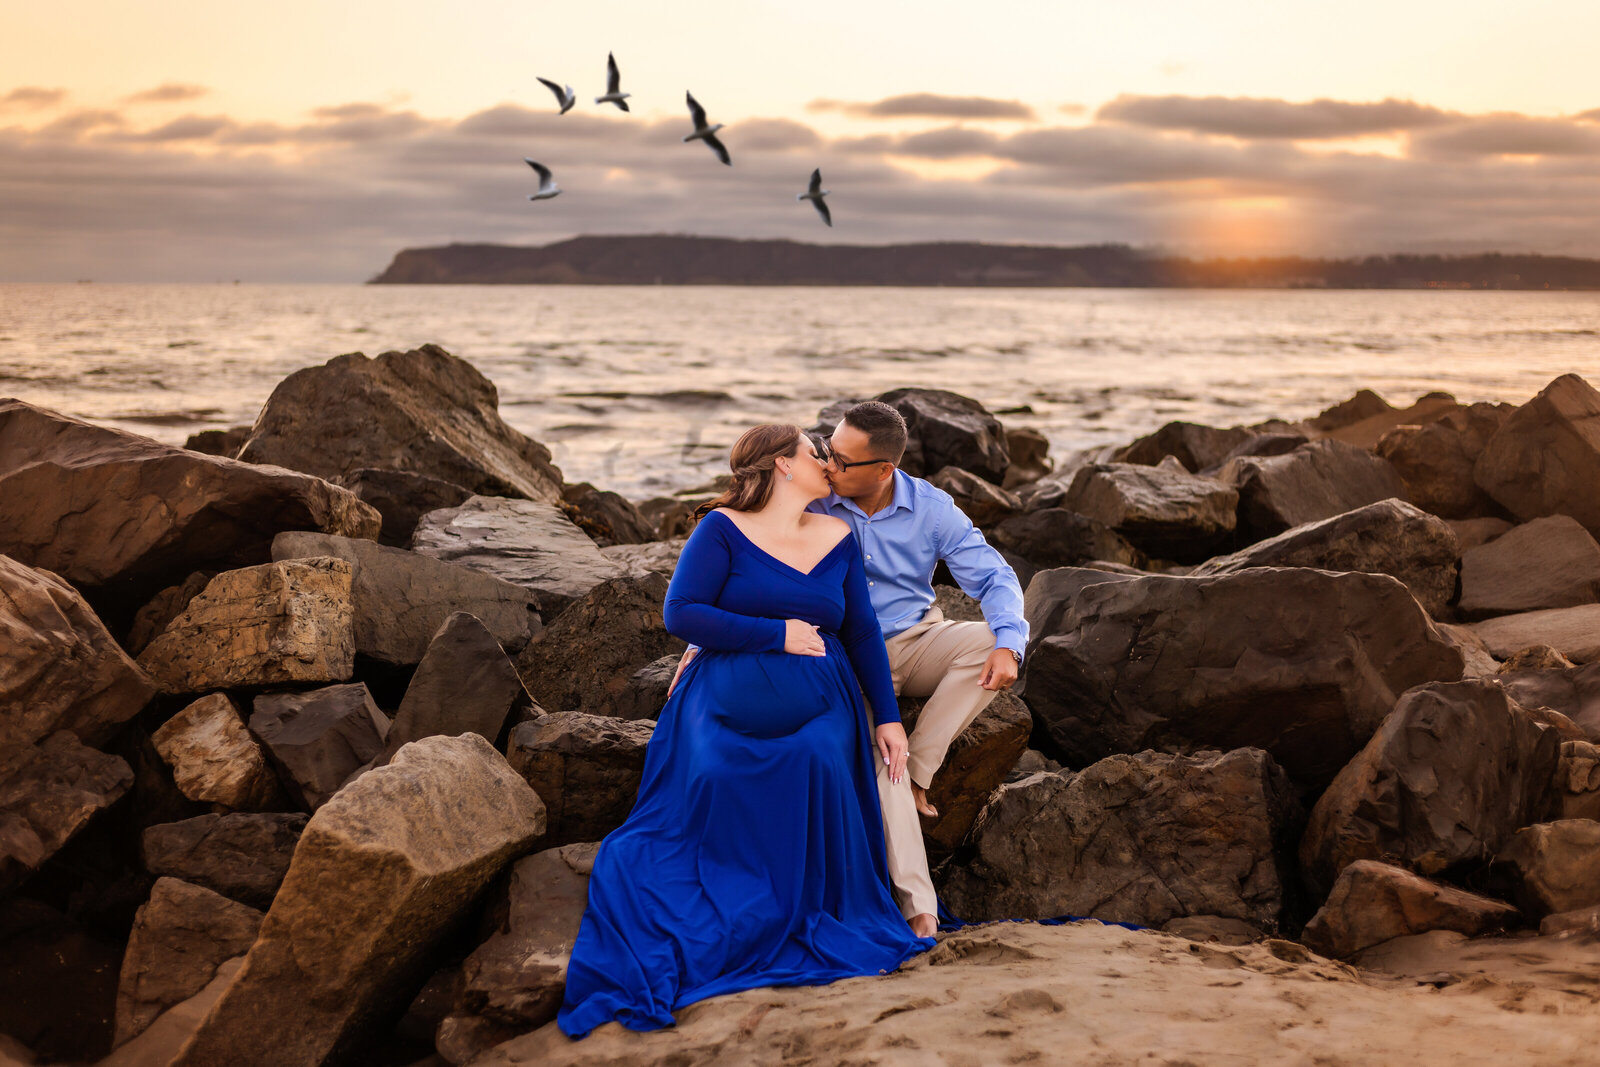 Maternity Photographer, a couple sit together on the rocks at the beach, she is pregnant